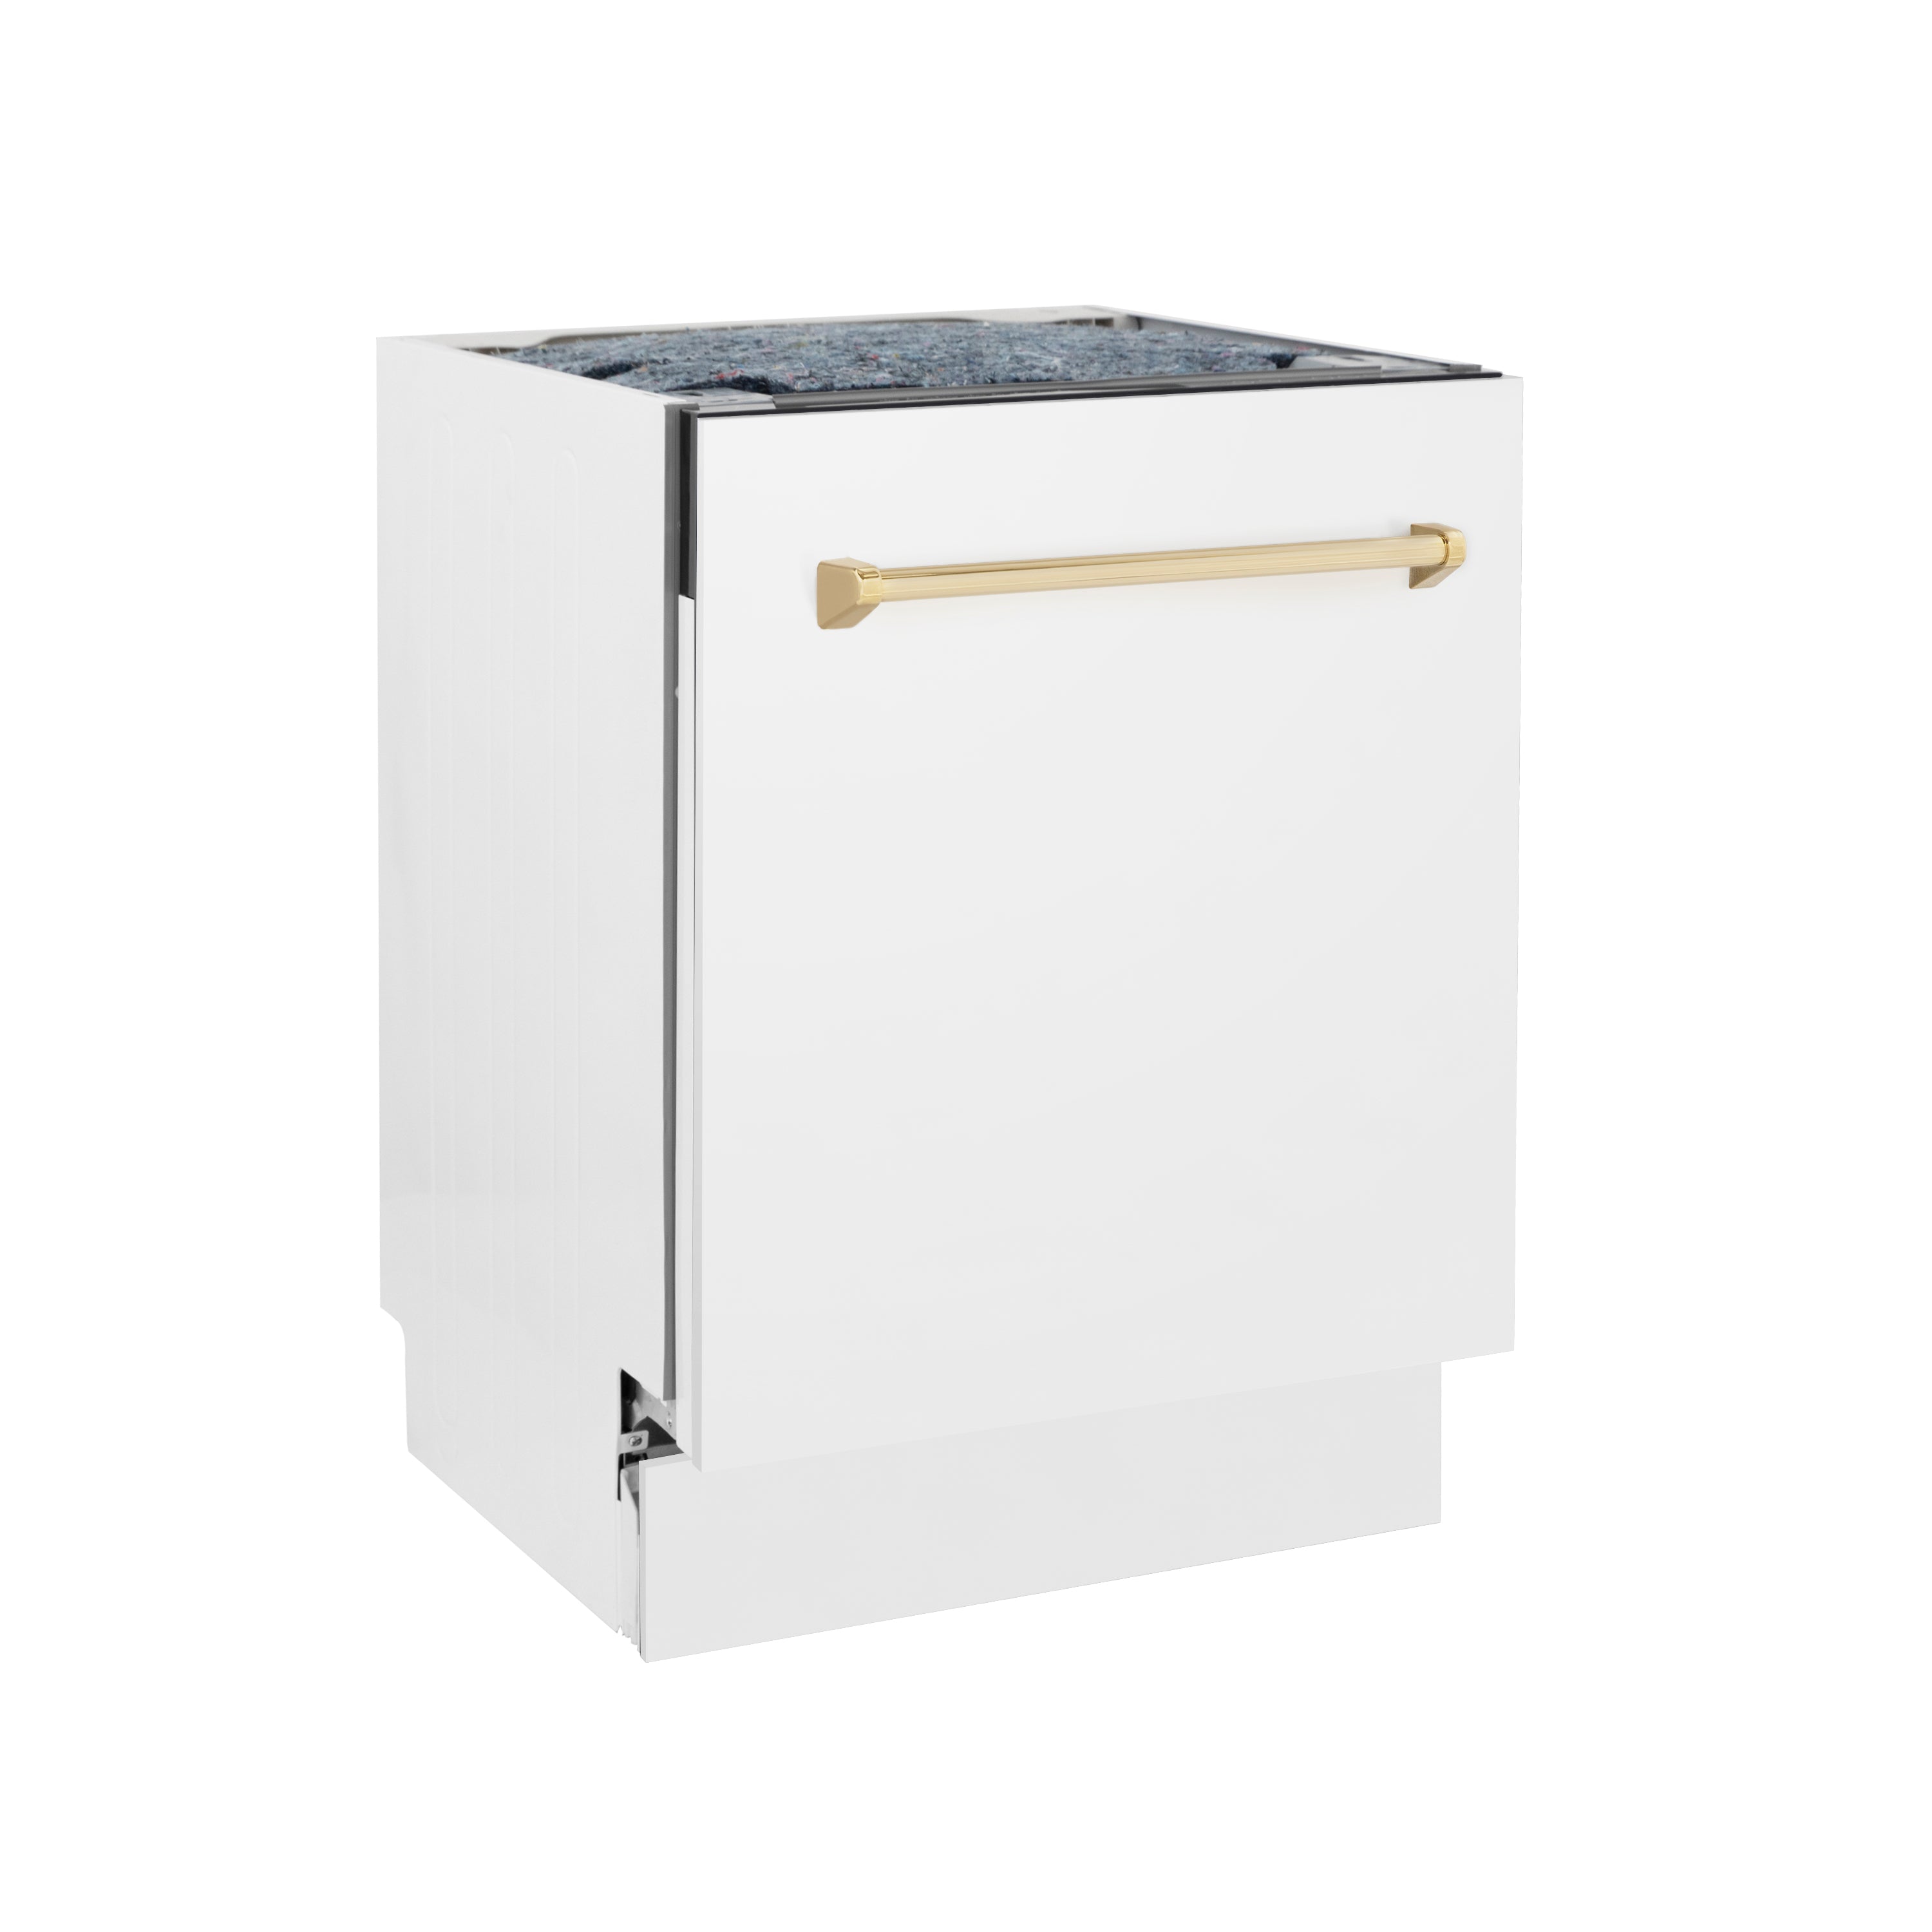 ZLINE Autograph Edition 24" 3rd Rack Top Control Tall Tub Dishwasher in White Matte with Gold Handle, 51dBa (DWVZ-WM-24-G)